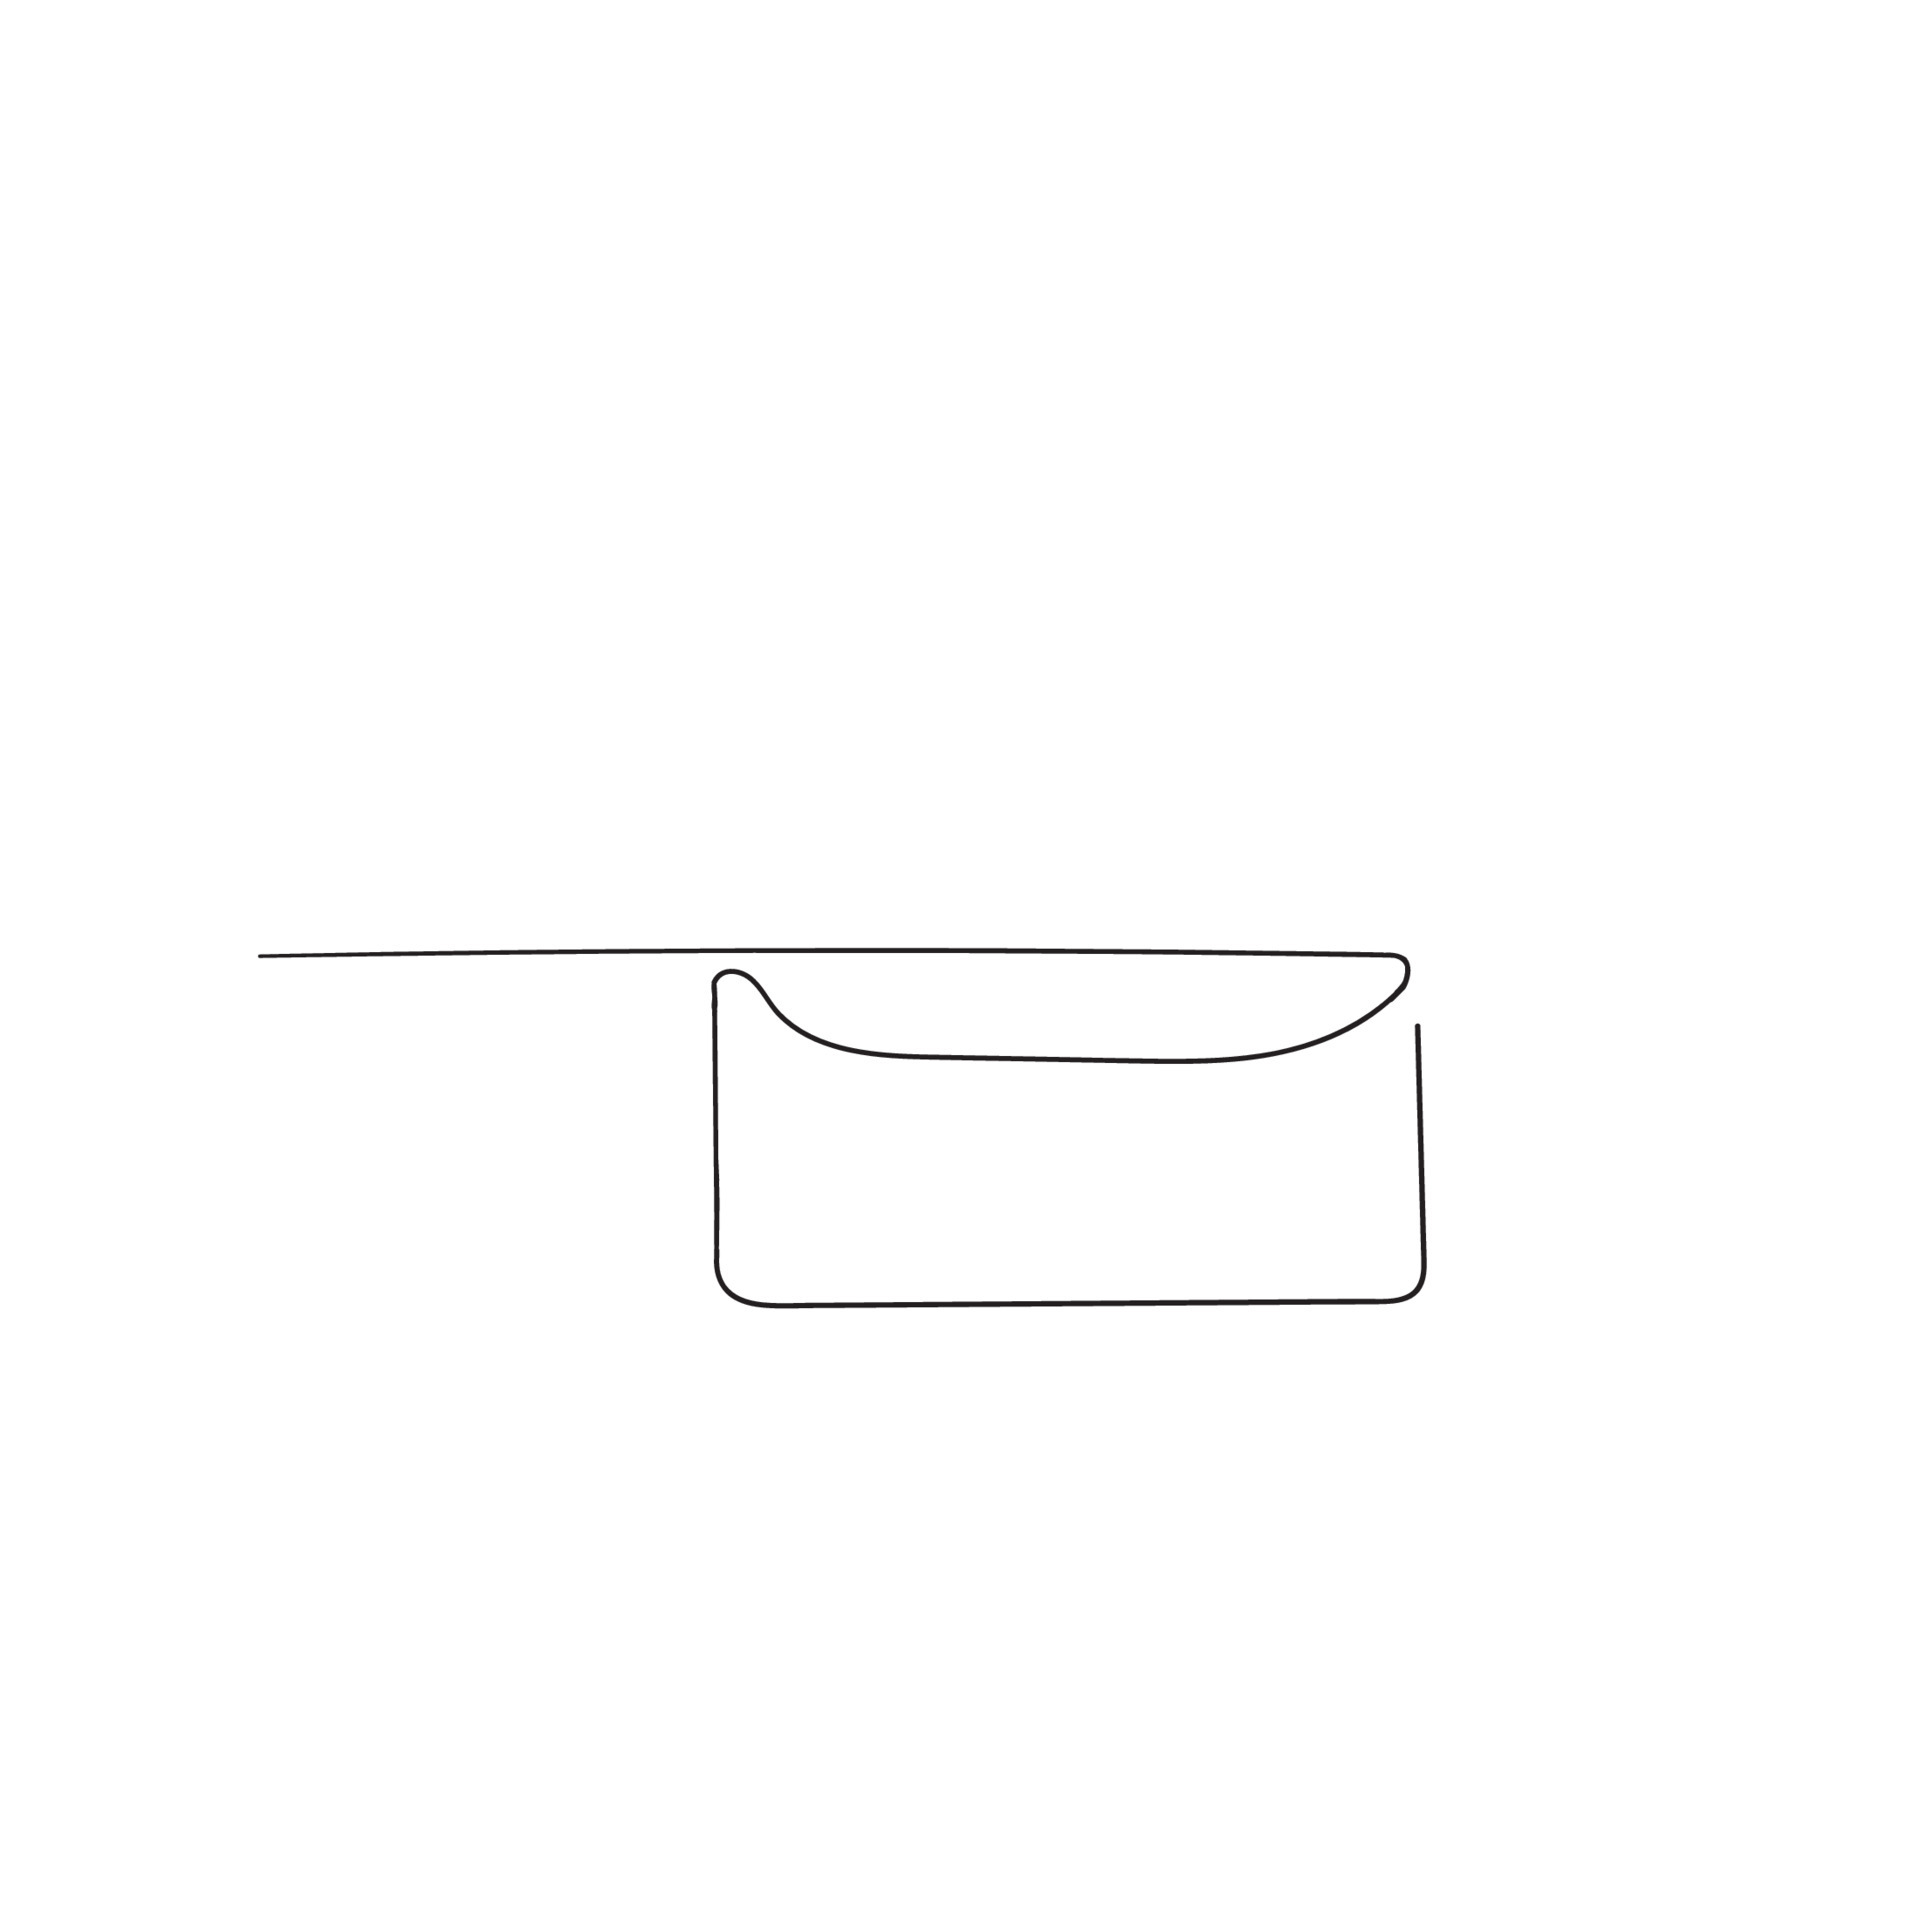 hand drawn doodle envelope illustration in single line vector style ...